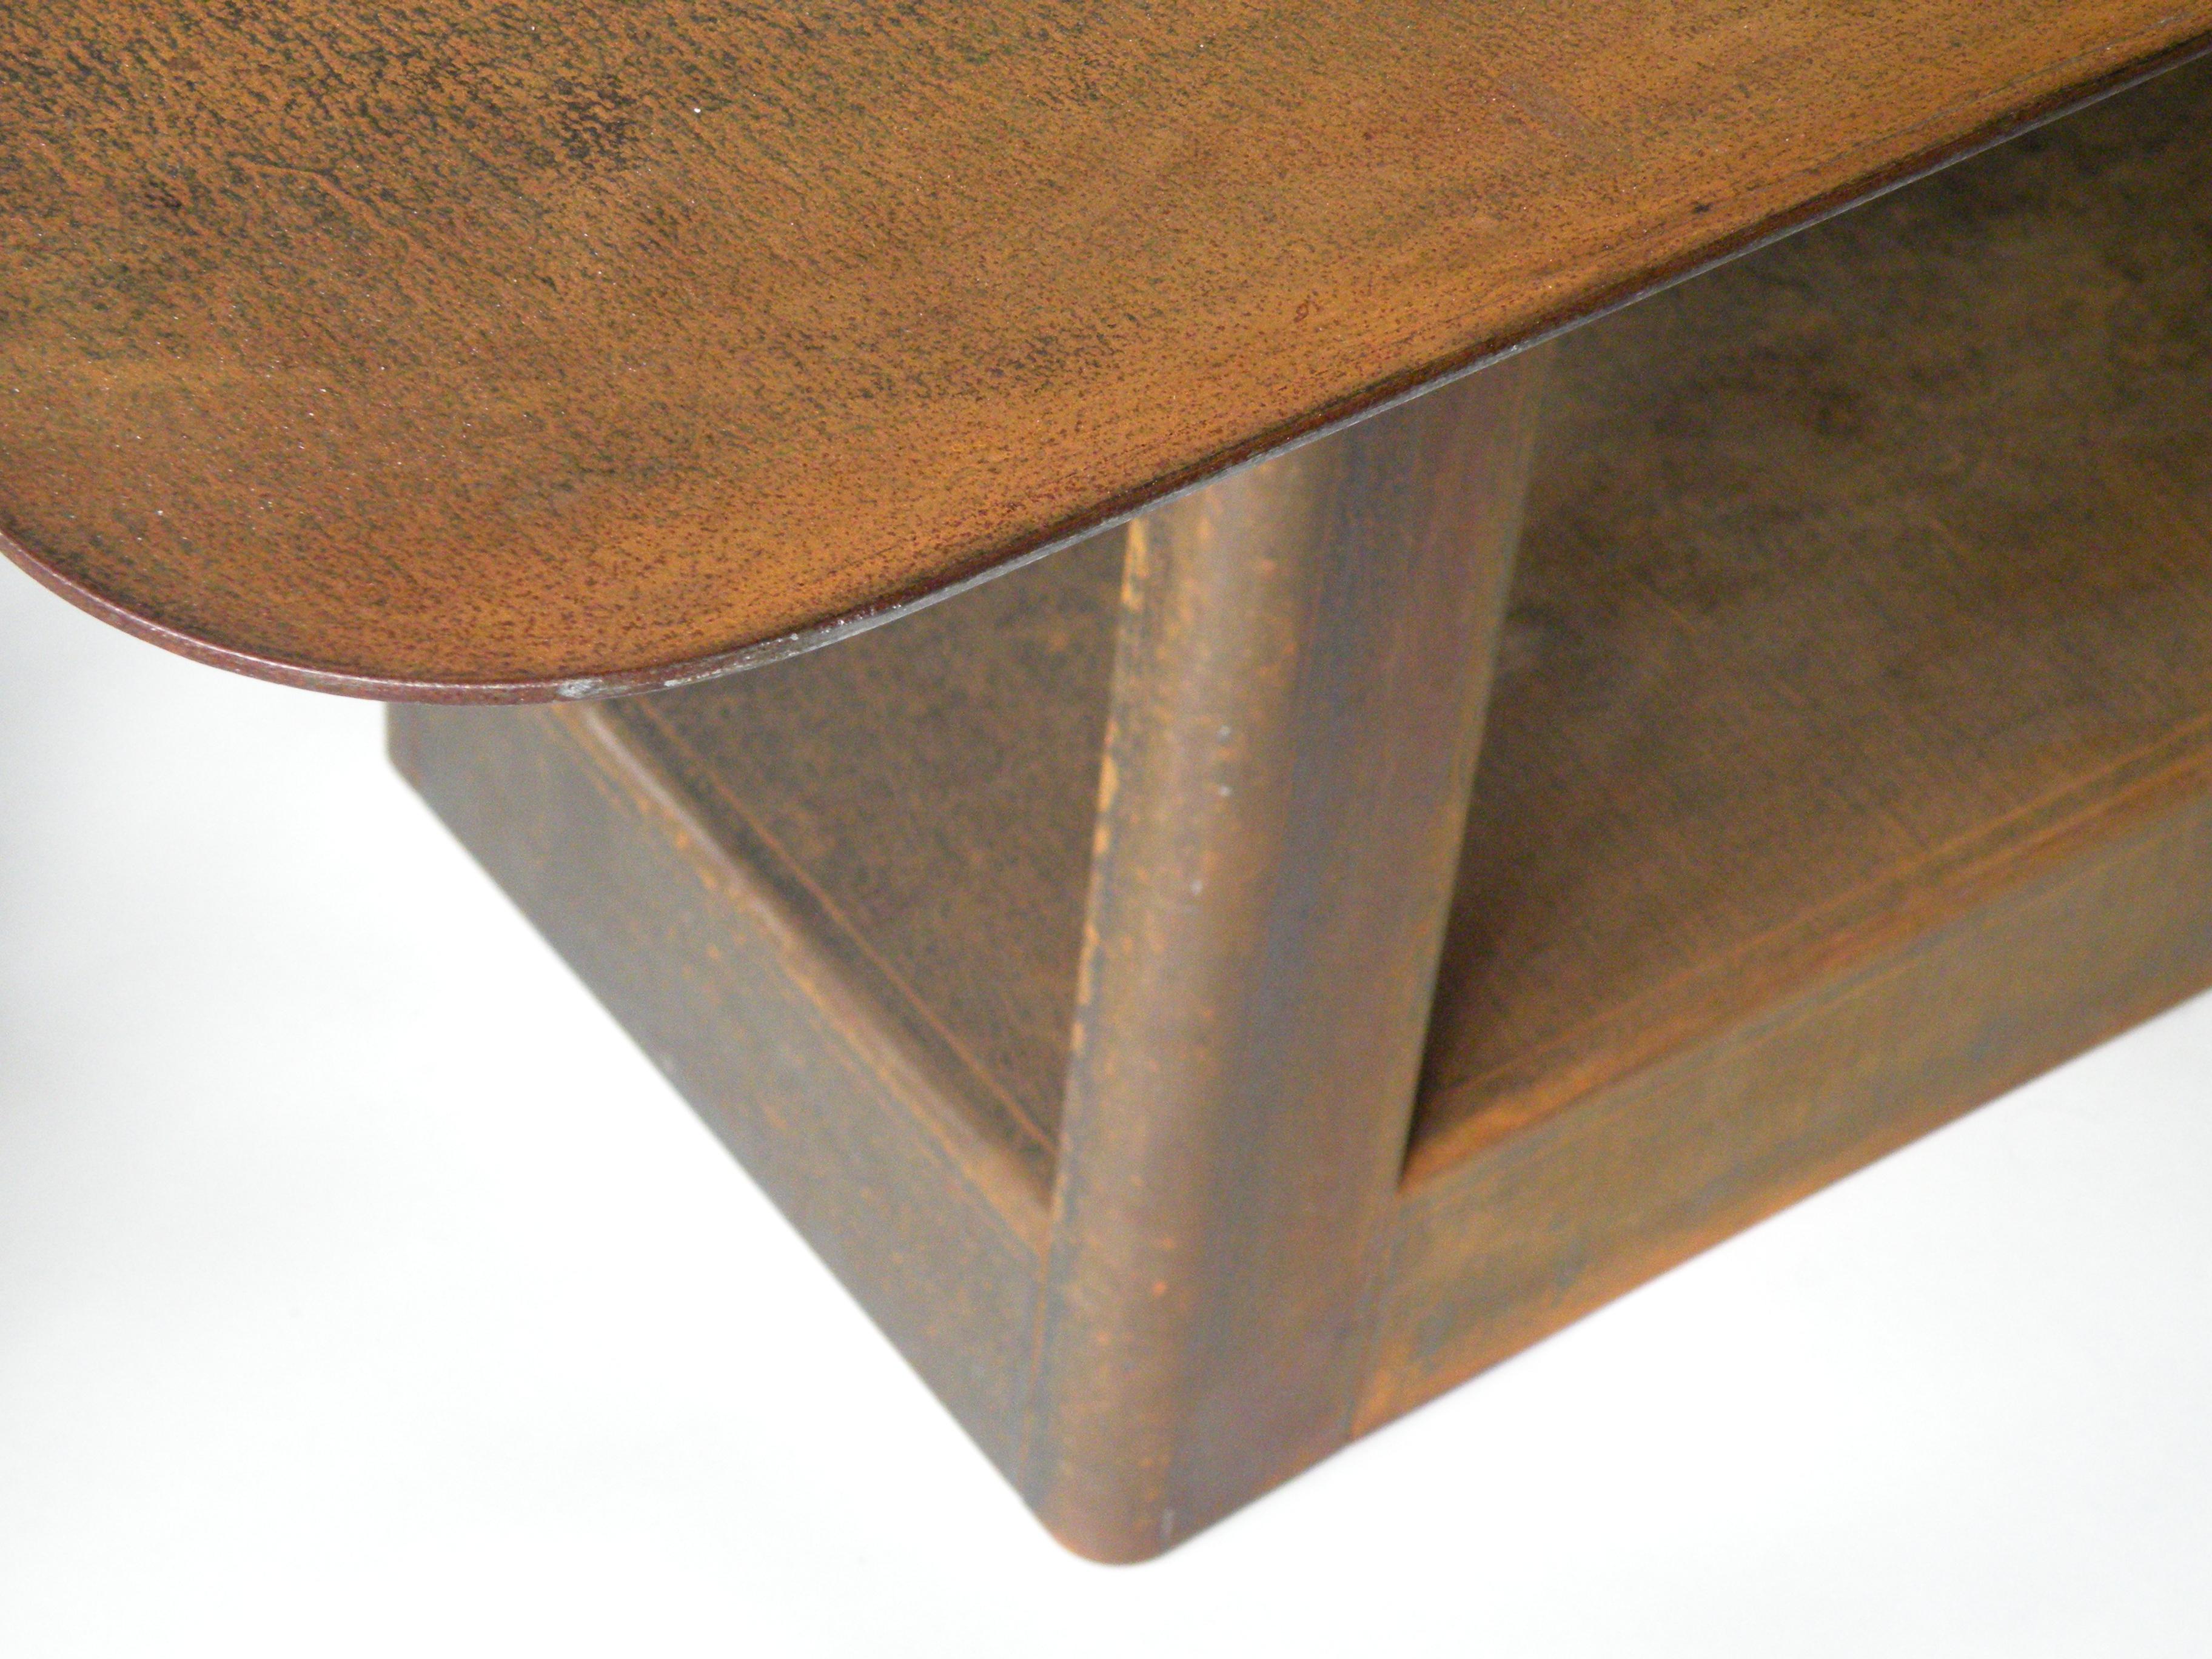 Metalwork 'Table&Cloth' Indoor and Outdoor Corten Steel Table with Leather Cloth For Sale